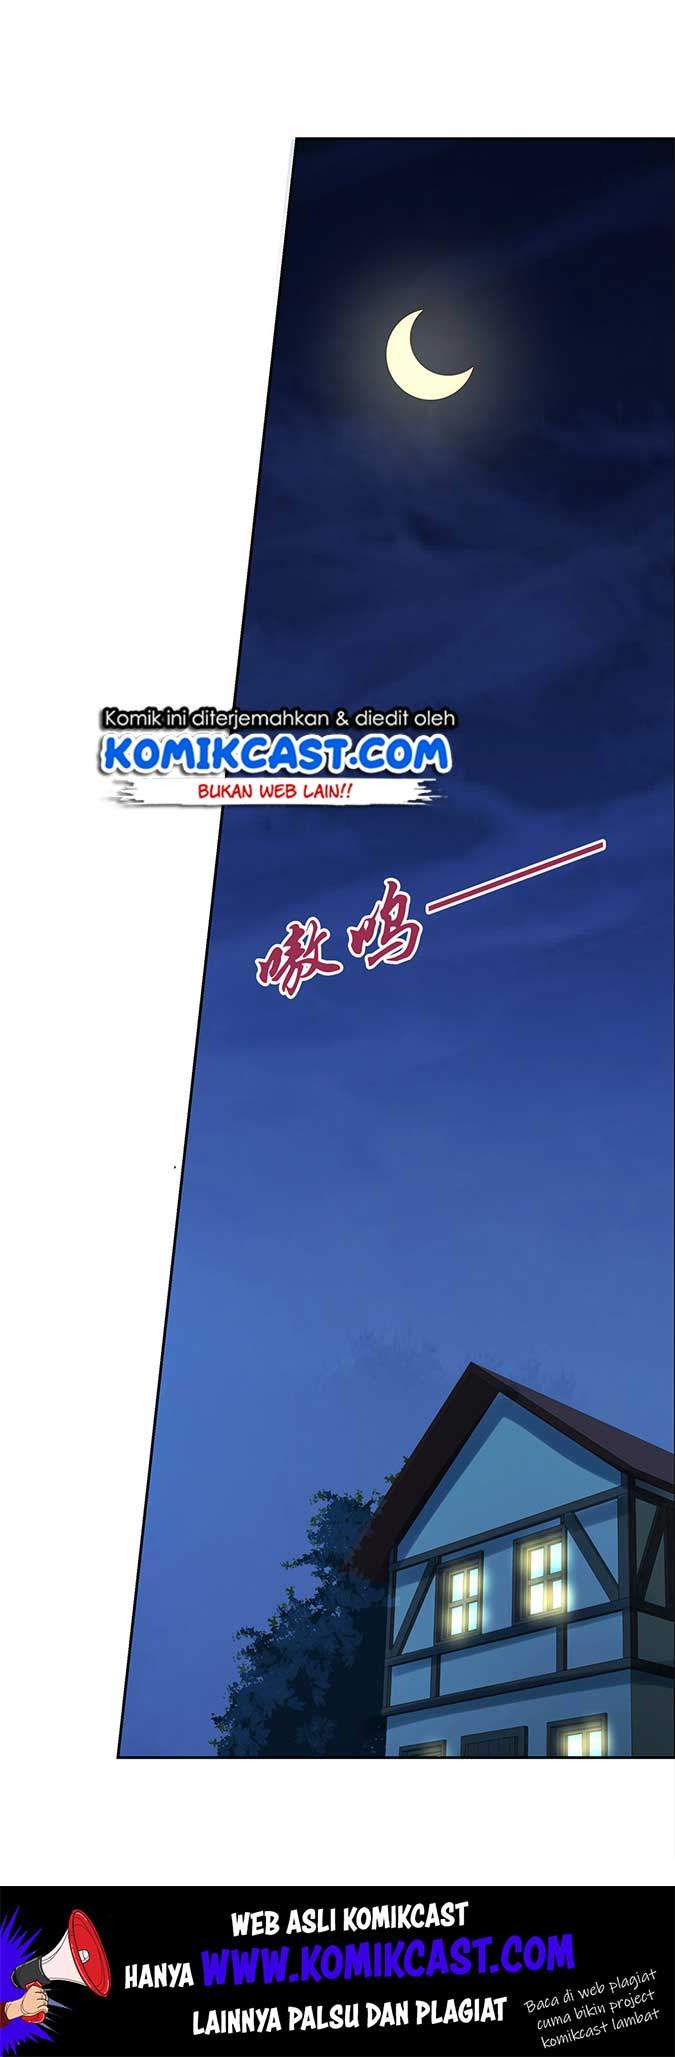 The Demon King Who Lost His Job Chapter 72 Bahasa Indonesia